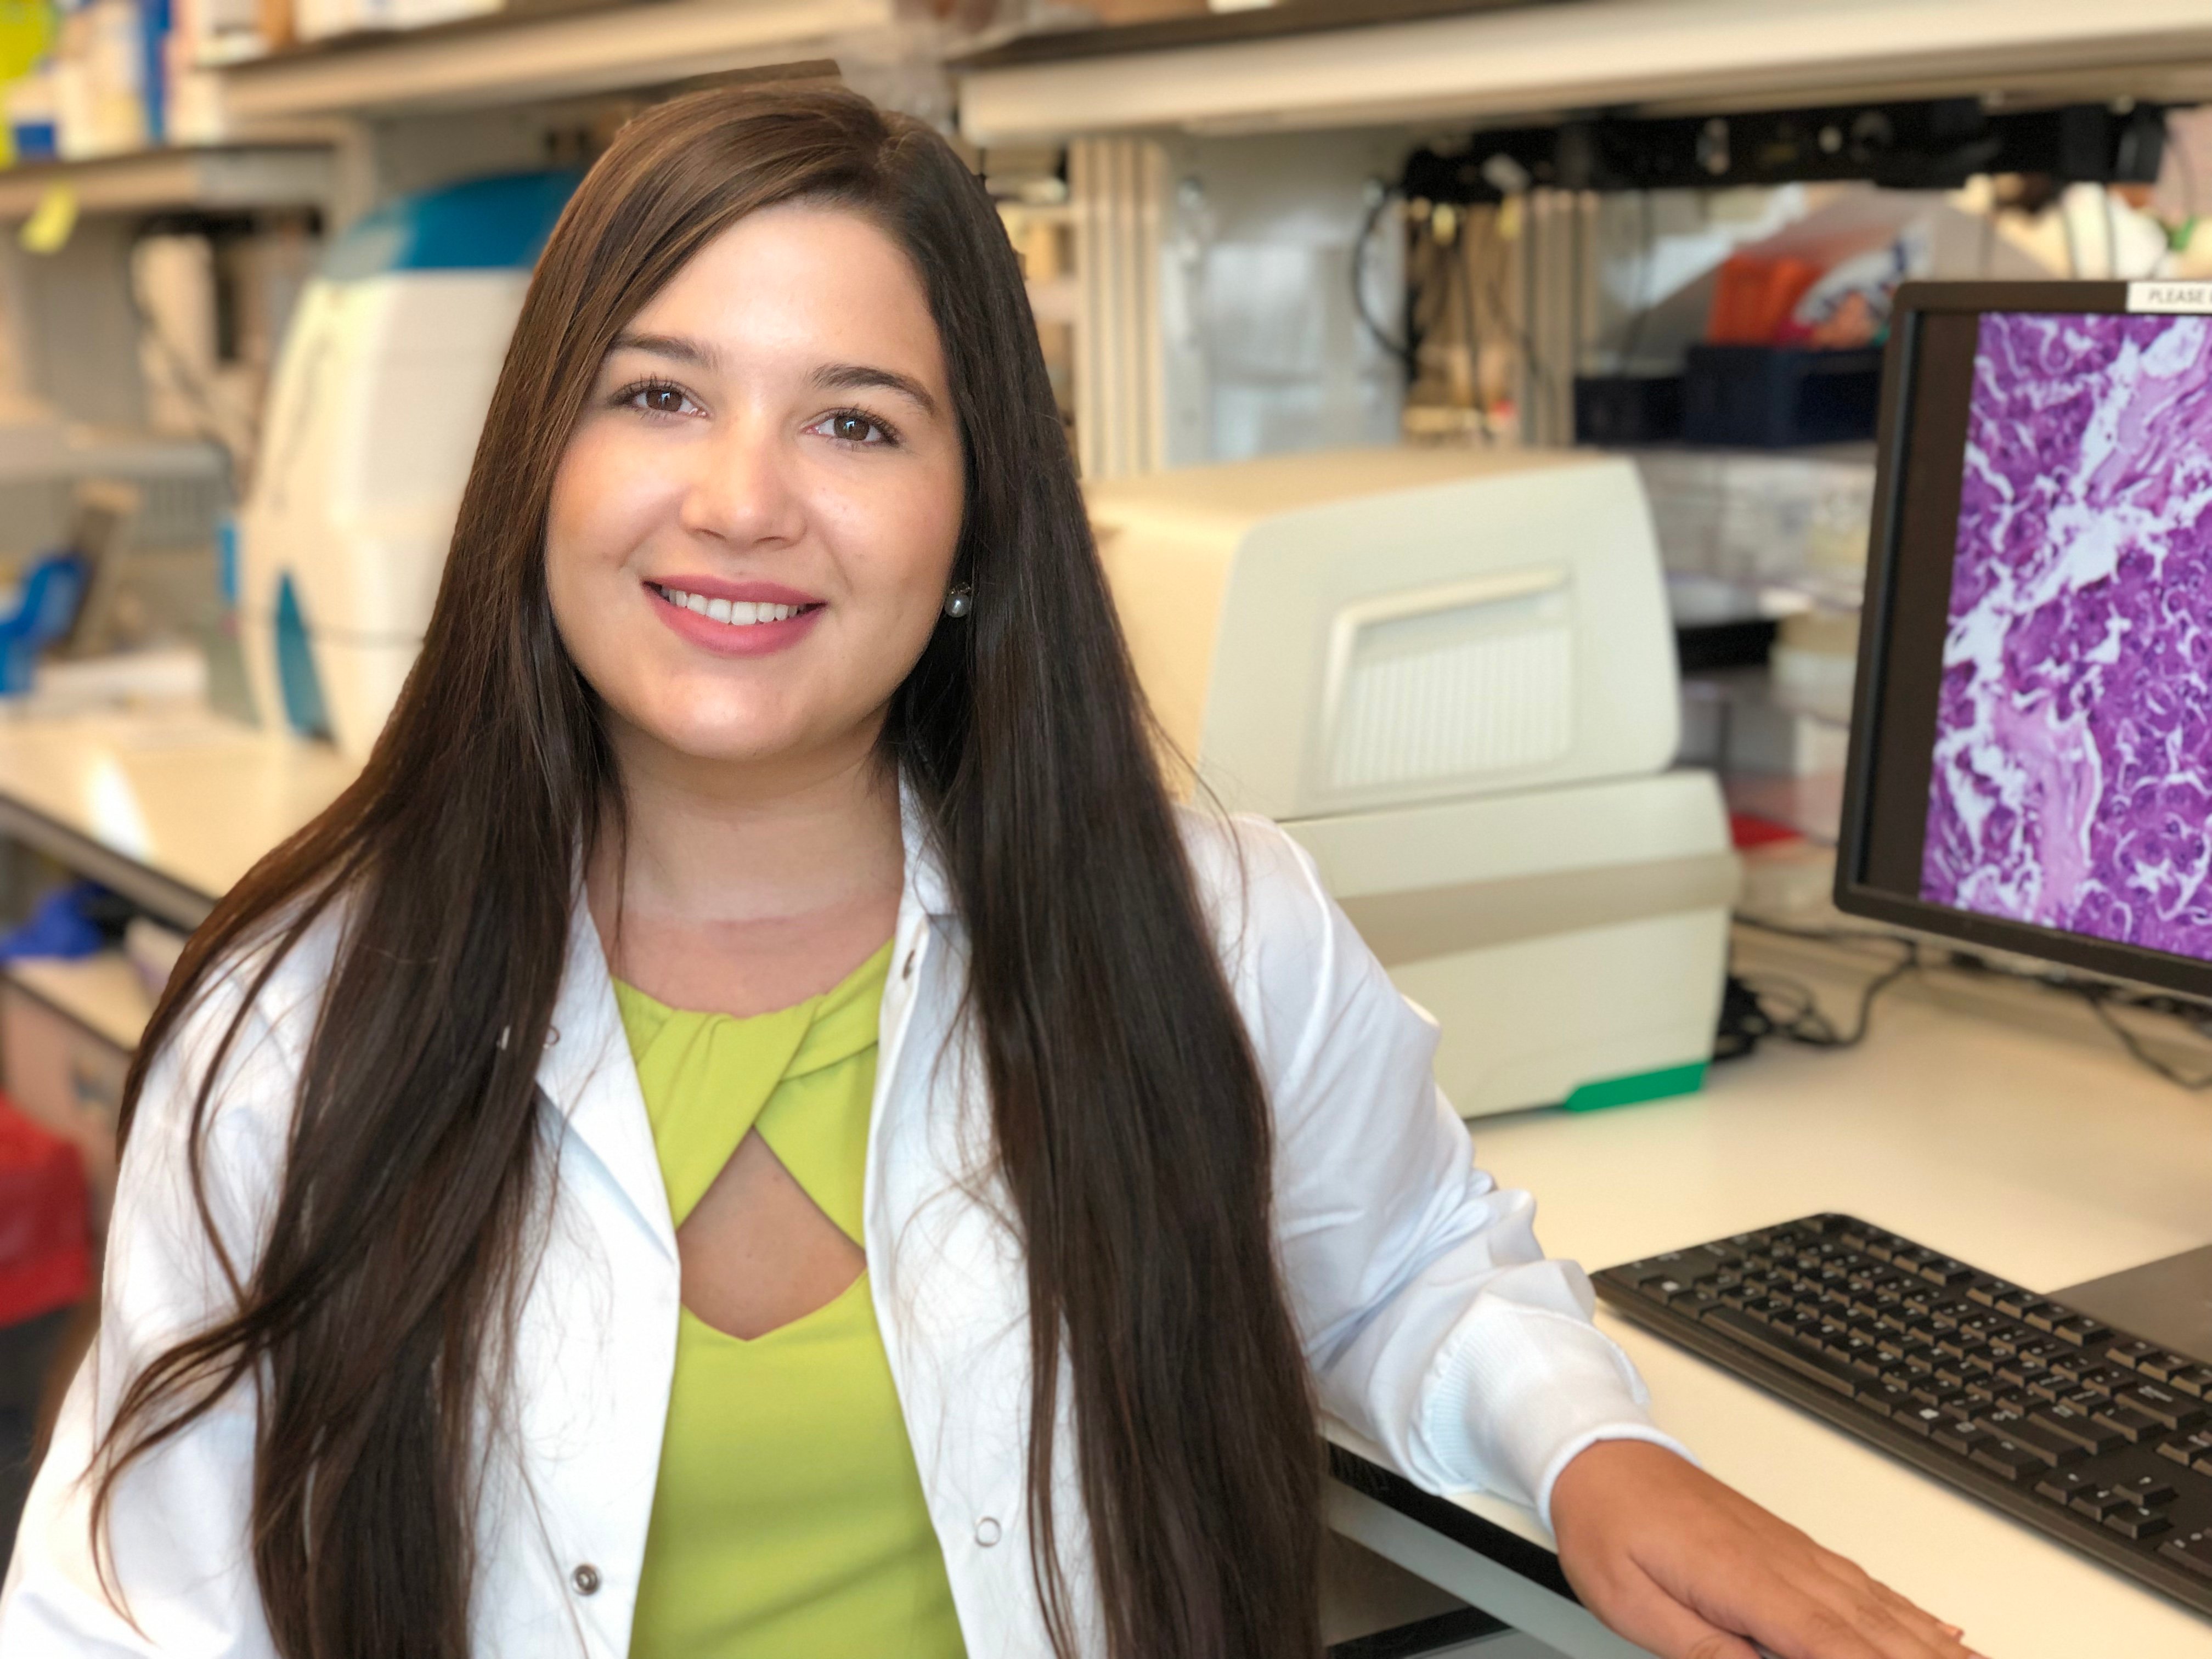 GSBS PhD student Carolina García García publishes paper in Gastroenterology; gives advice to first authors